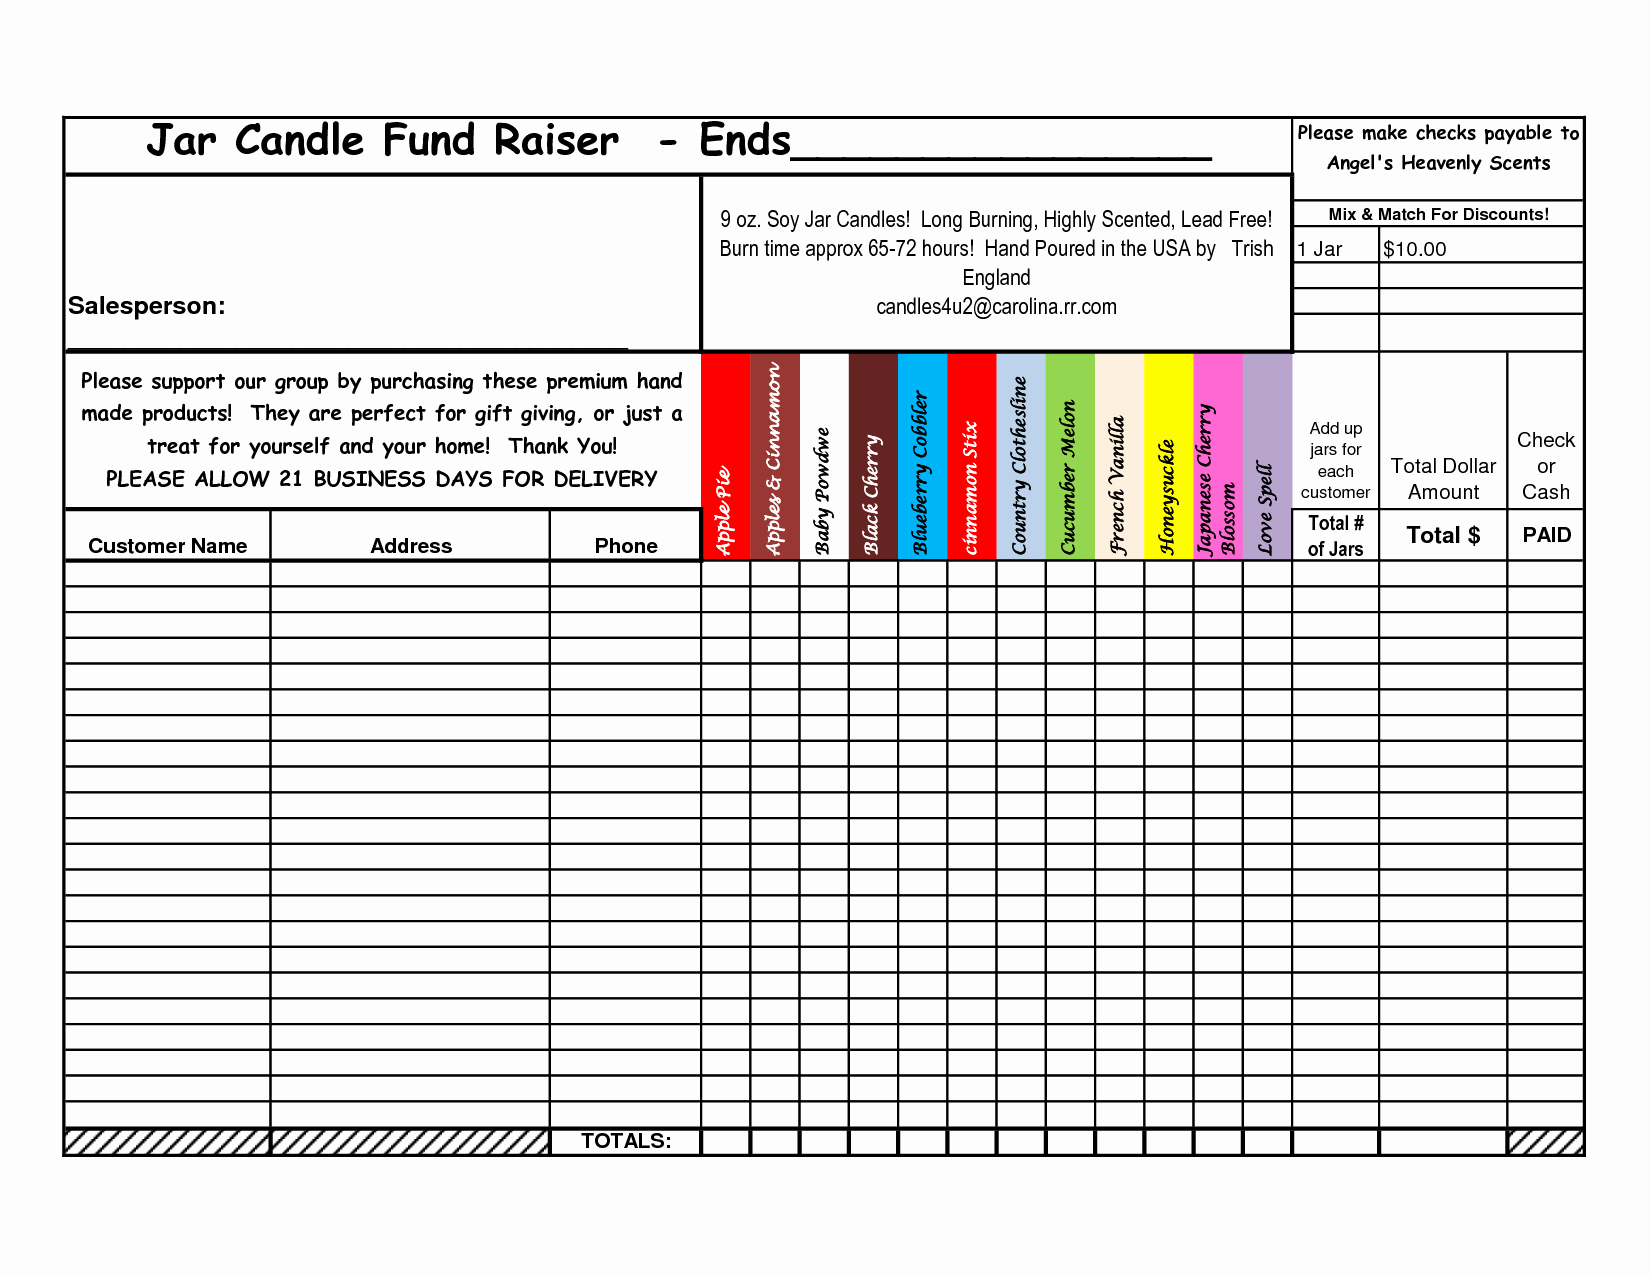 7 Best Of Printable Fundraiser order forms Free